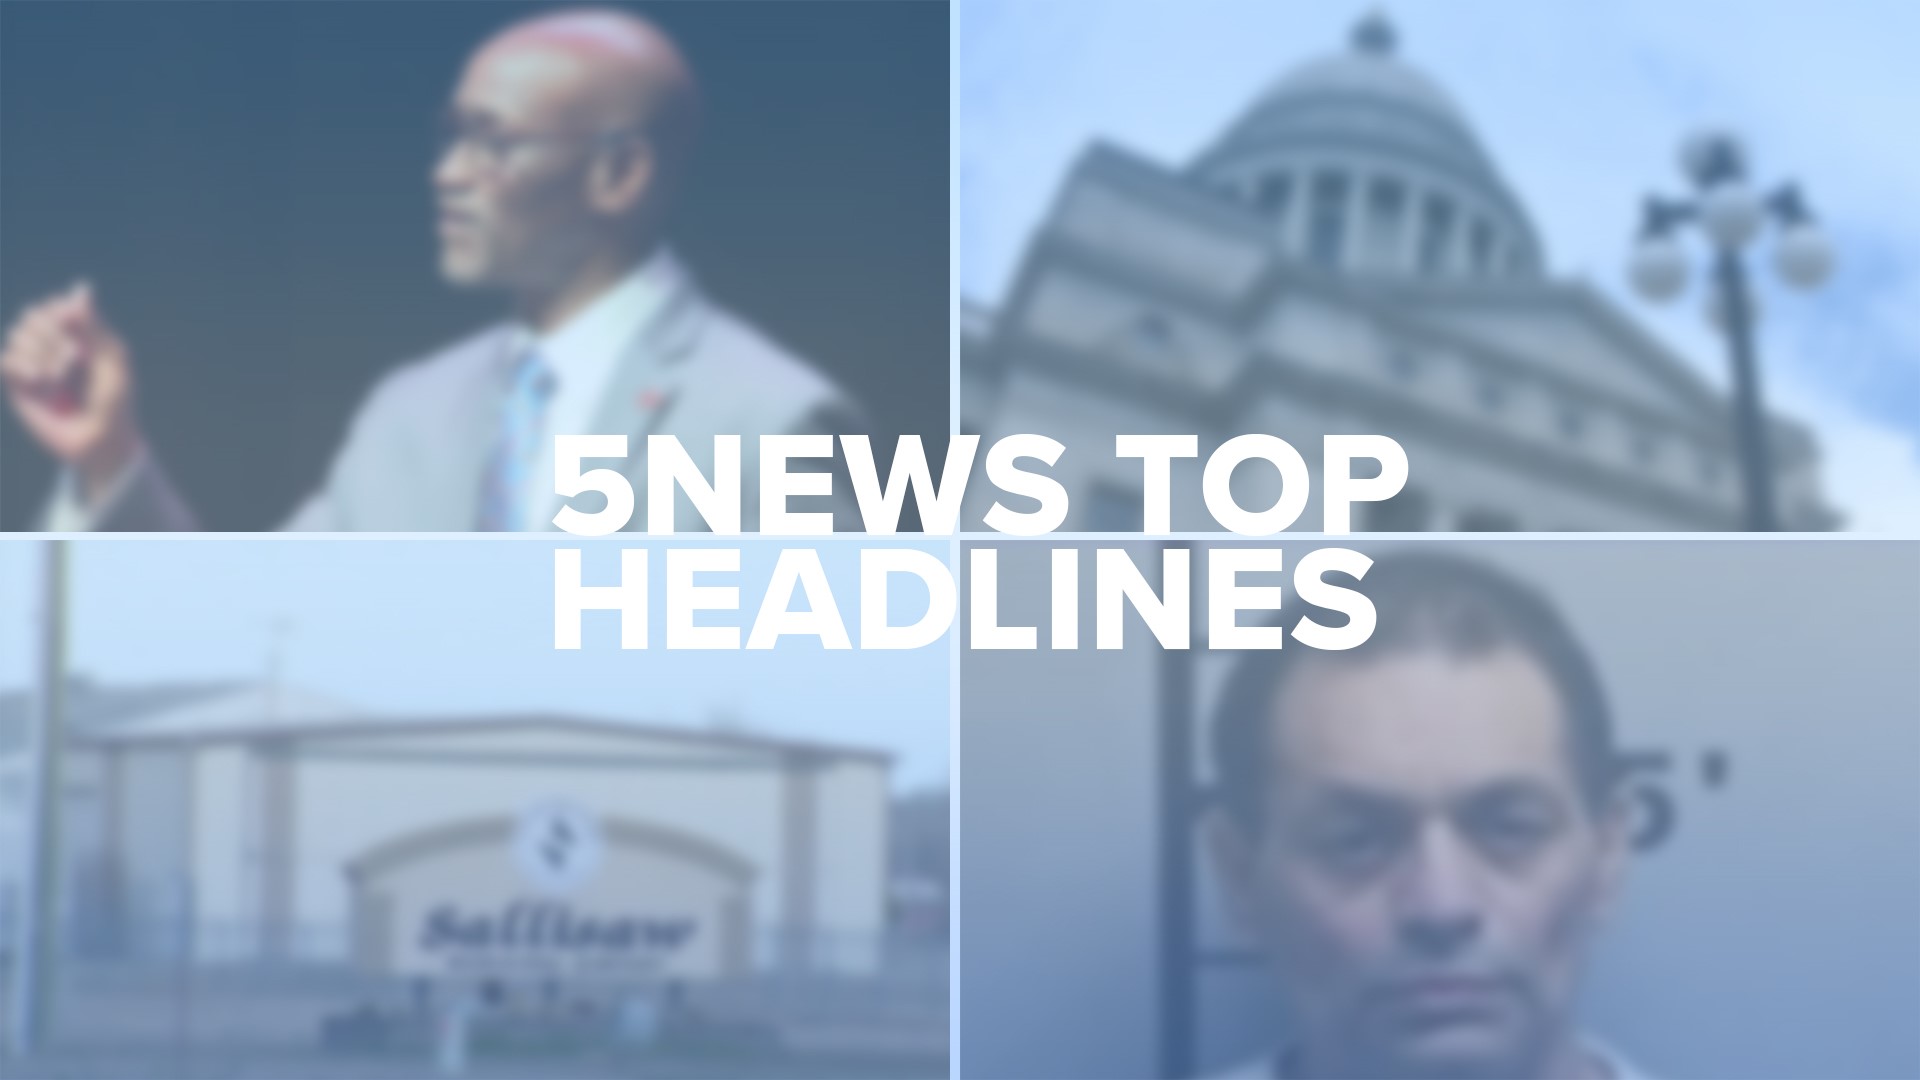 Take a look at some of the top headlines for local news across our area! 📰